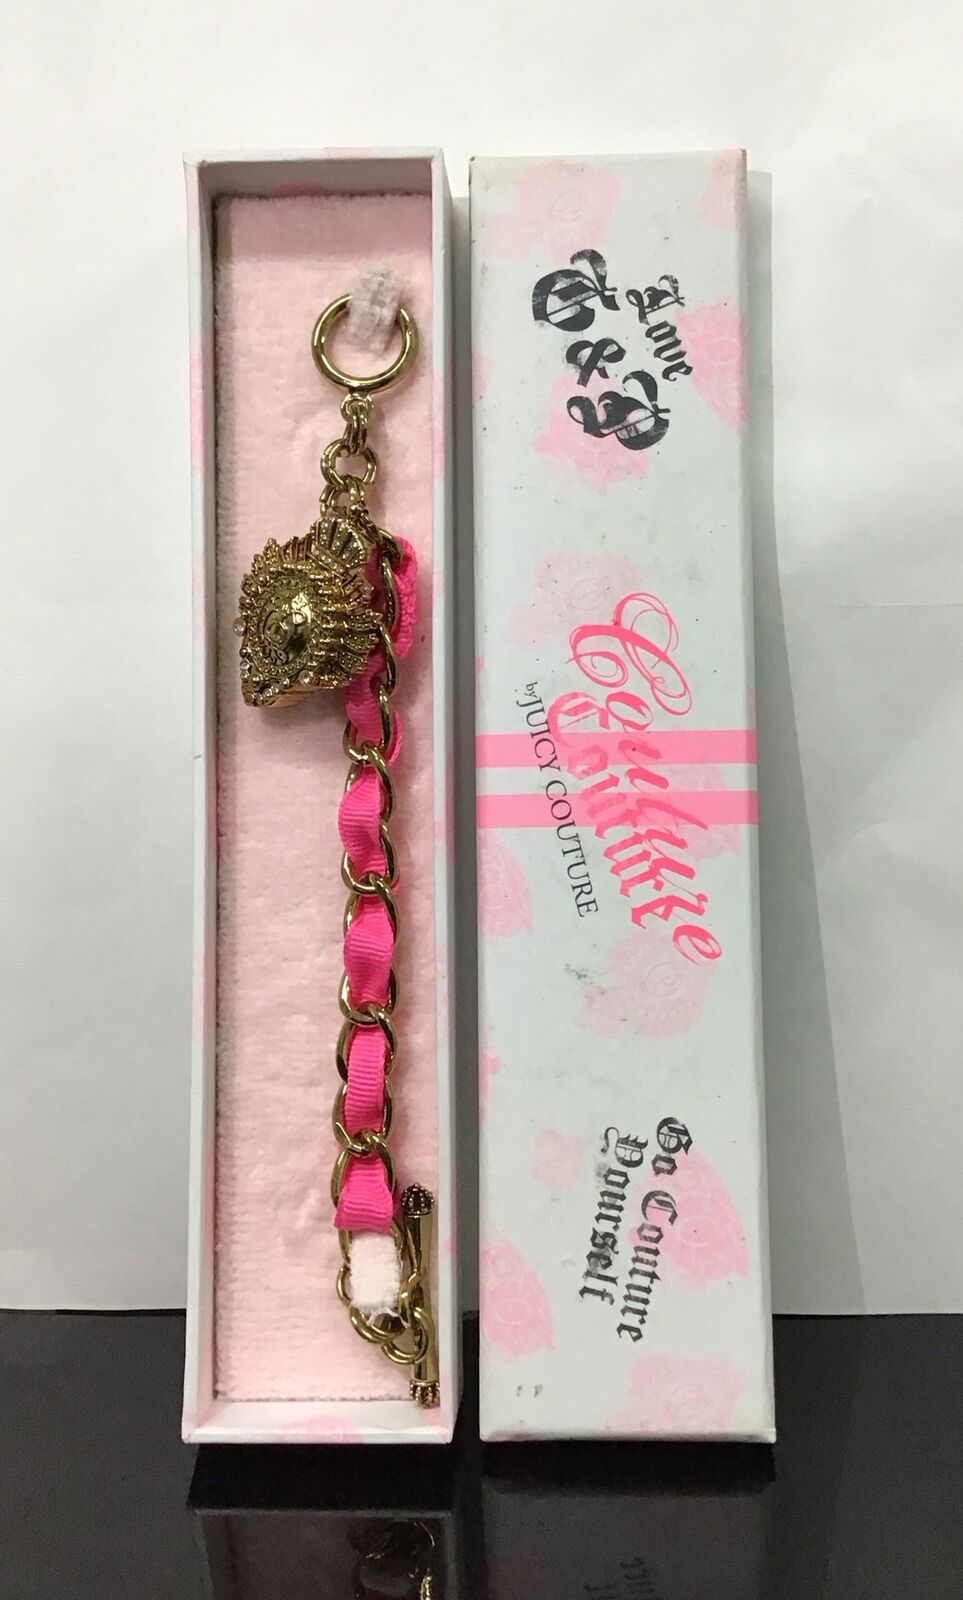 Juicy Couture , Couture Couture bracelet locket perfume, As Pictured